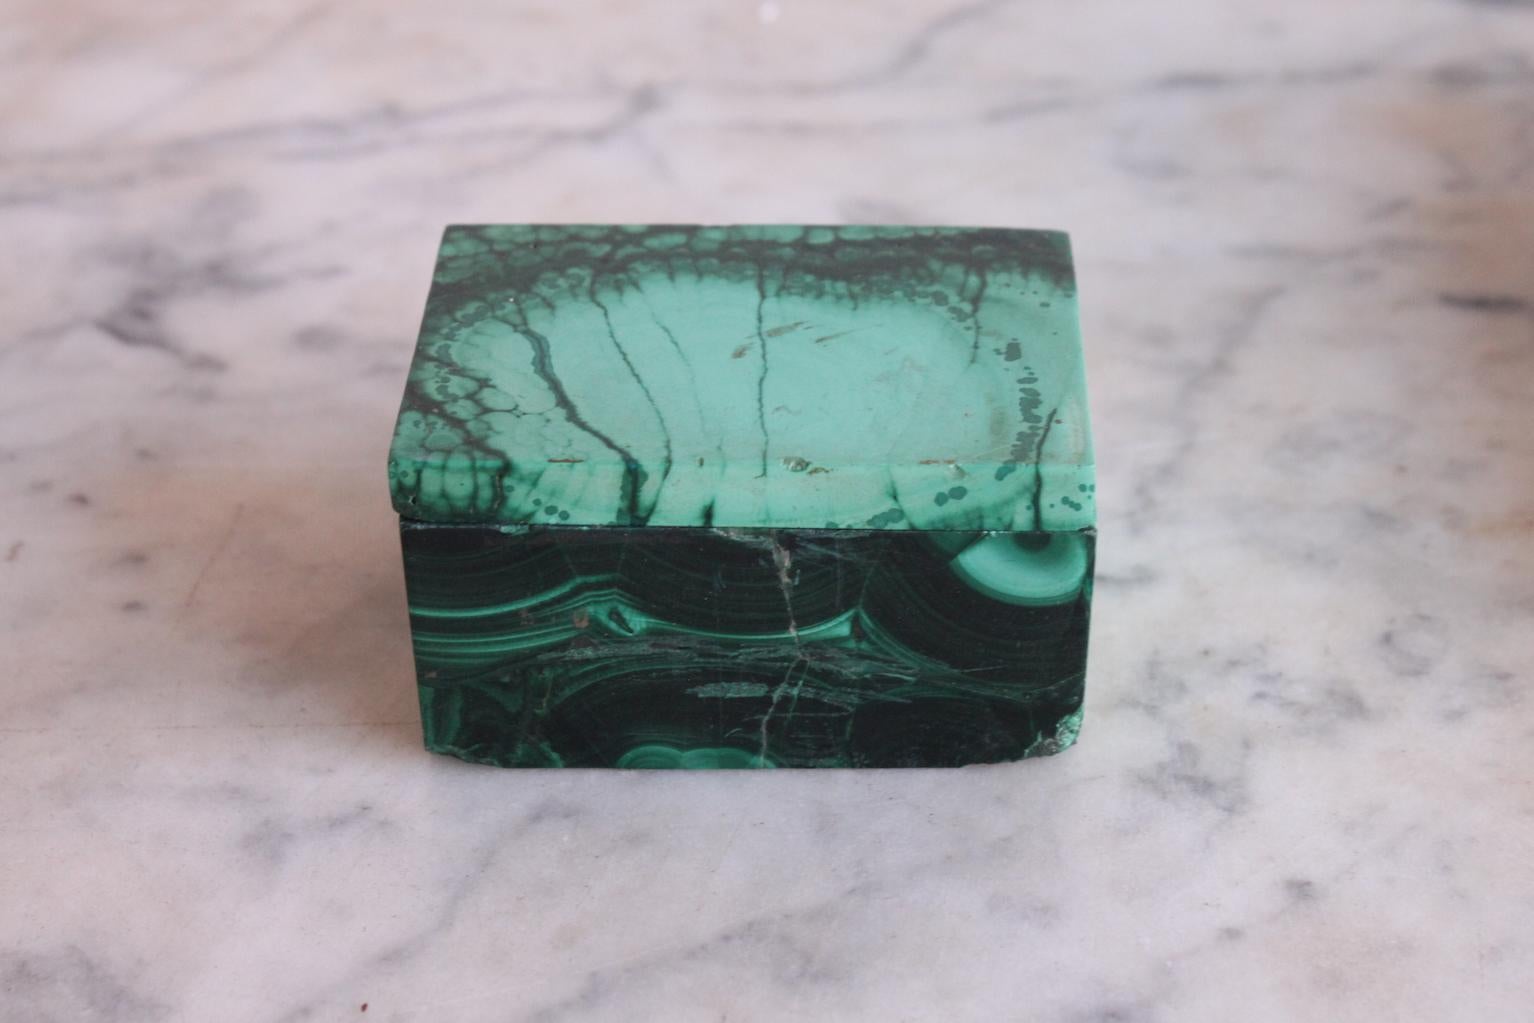 Two pretty boxes in malachite, probably Russian, 19th century.
Good condition for the big one, however the small one has accidents.
Dimensions of the big box: Width 18.5 cm, Depth 12.7 cm, Height 3 cm
Dimensions of the small one: Width 6.5 cm,